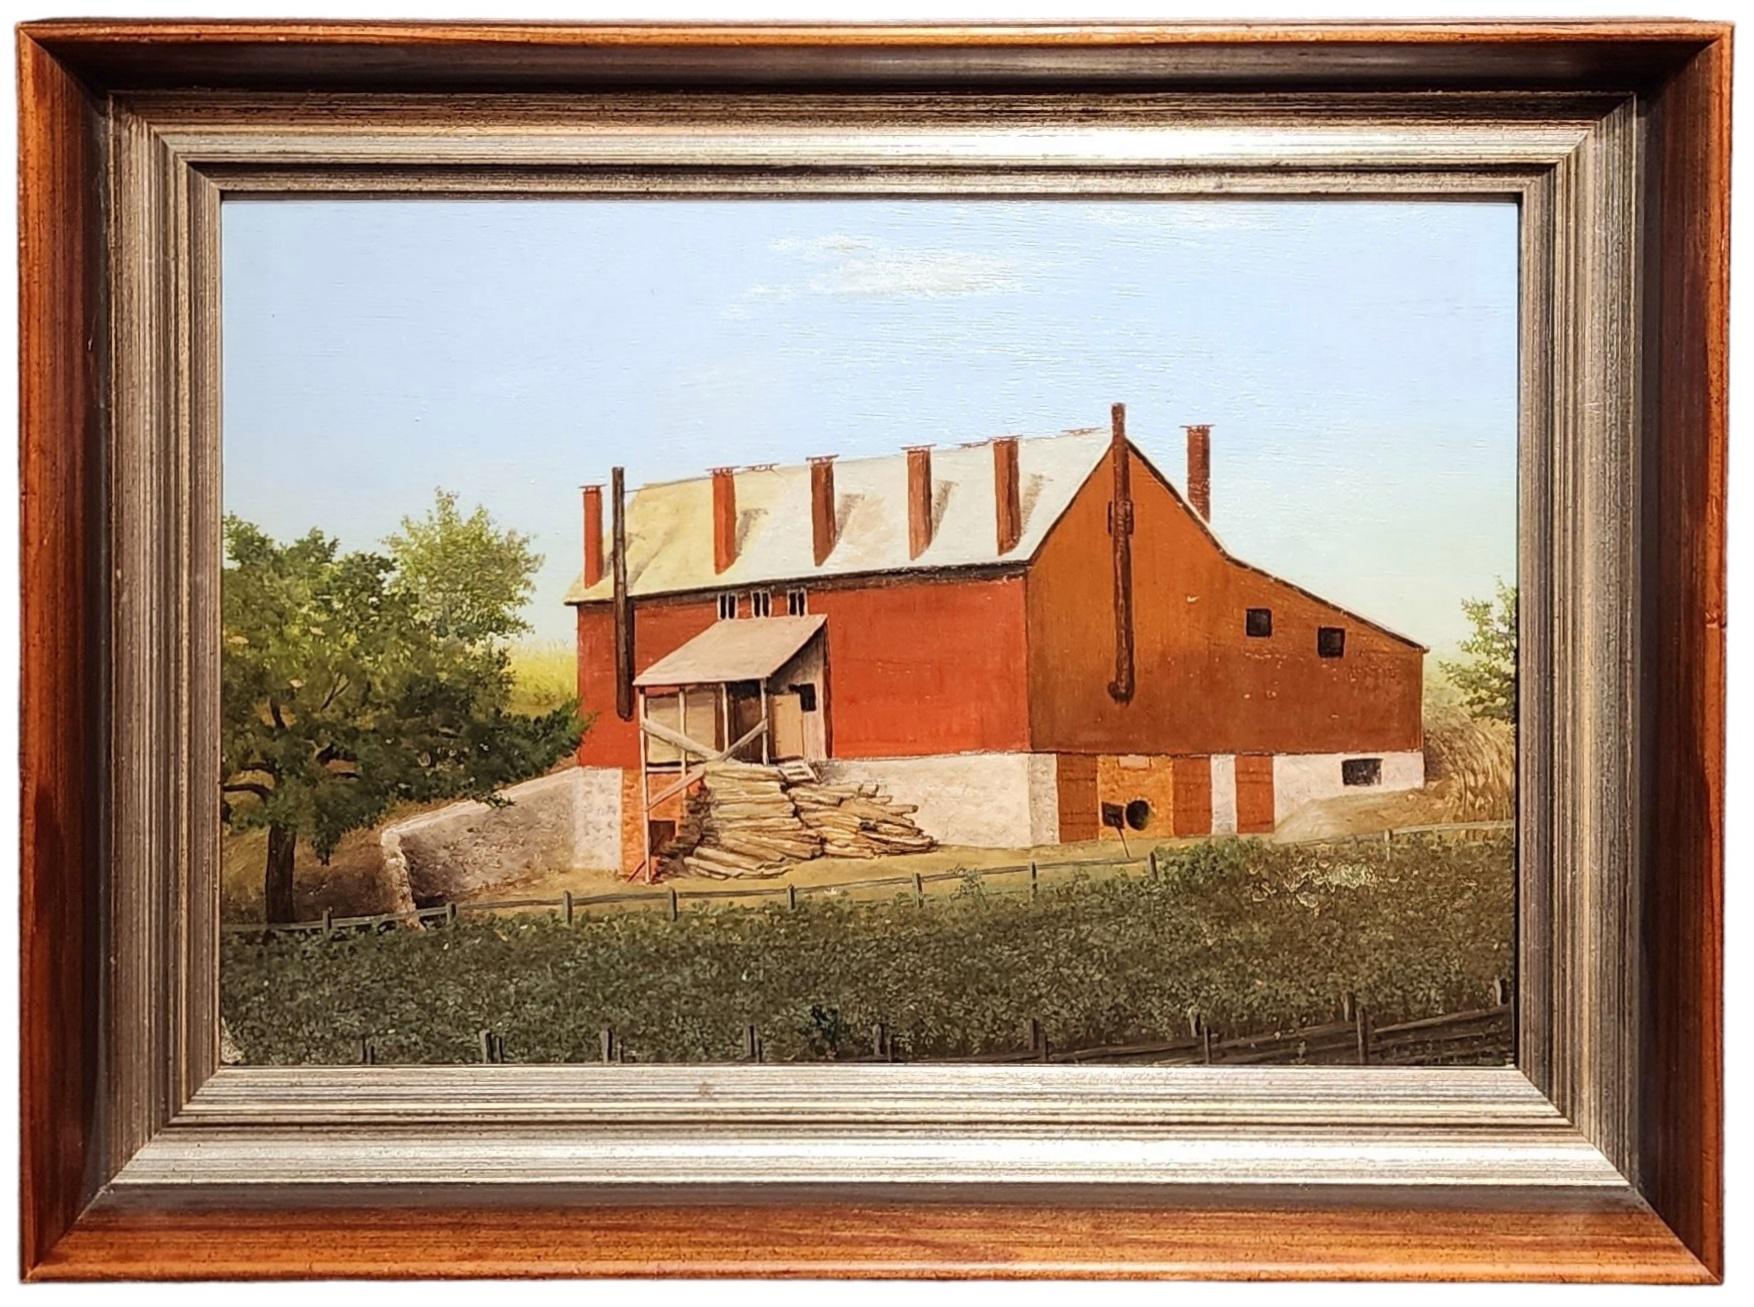 Unknown Landscape Painting - The Barn, Rural America, American Farm, Red Barn Painting